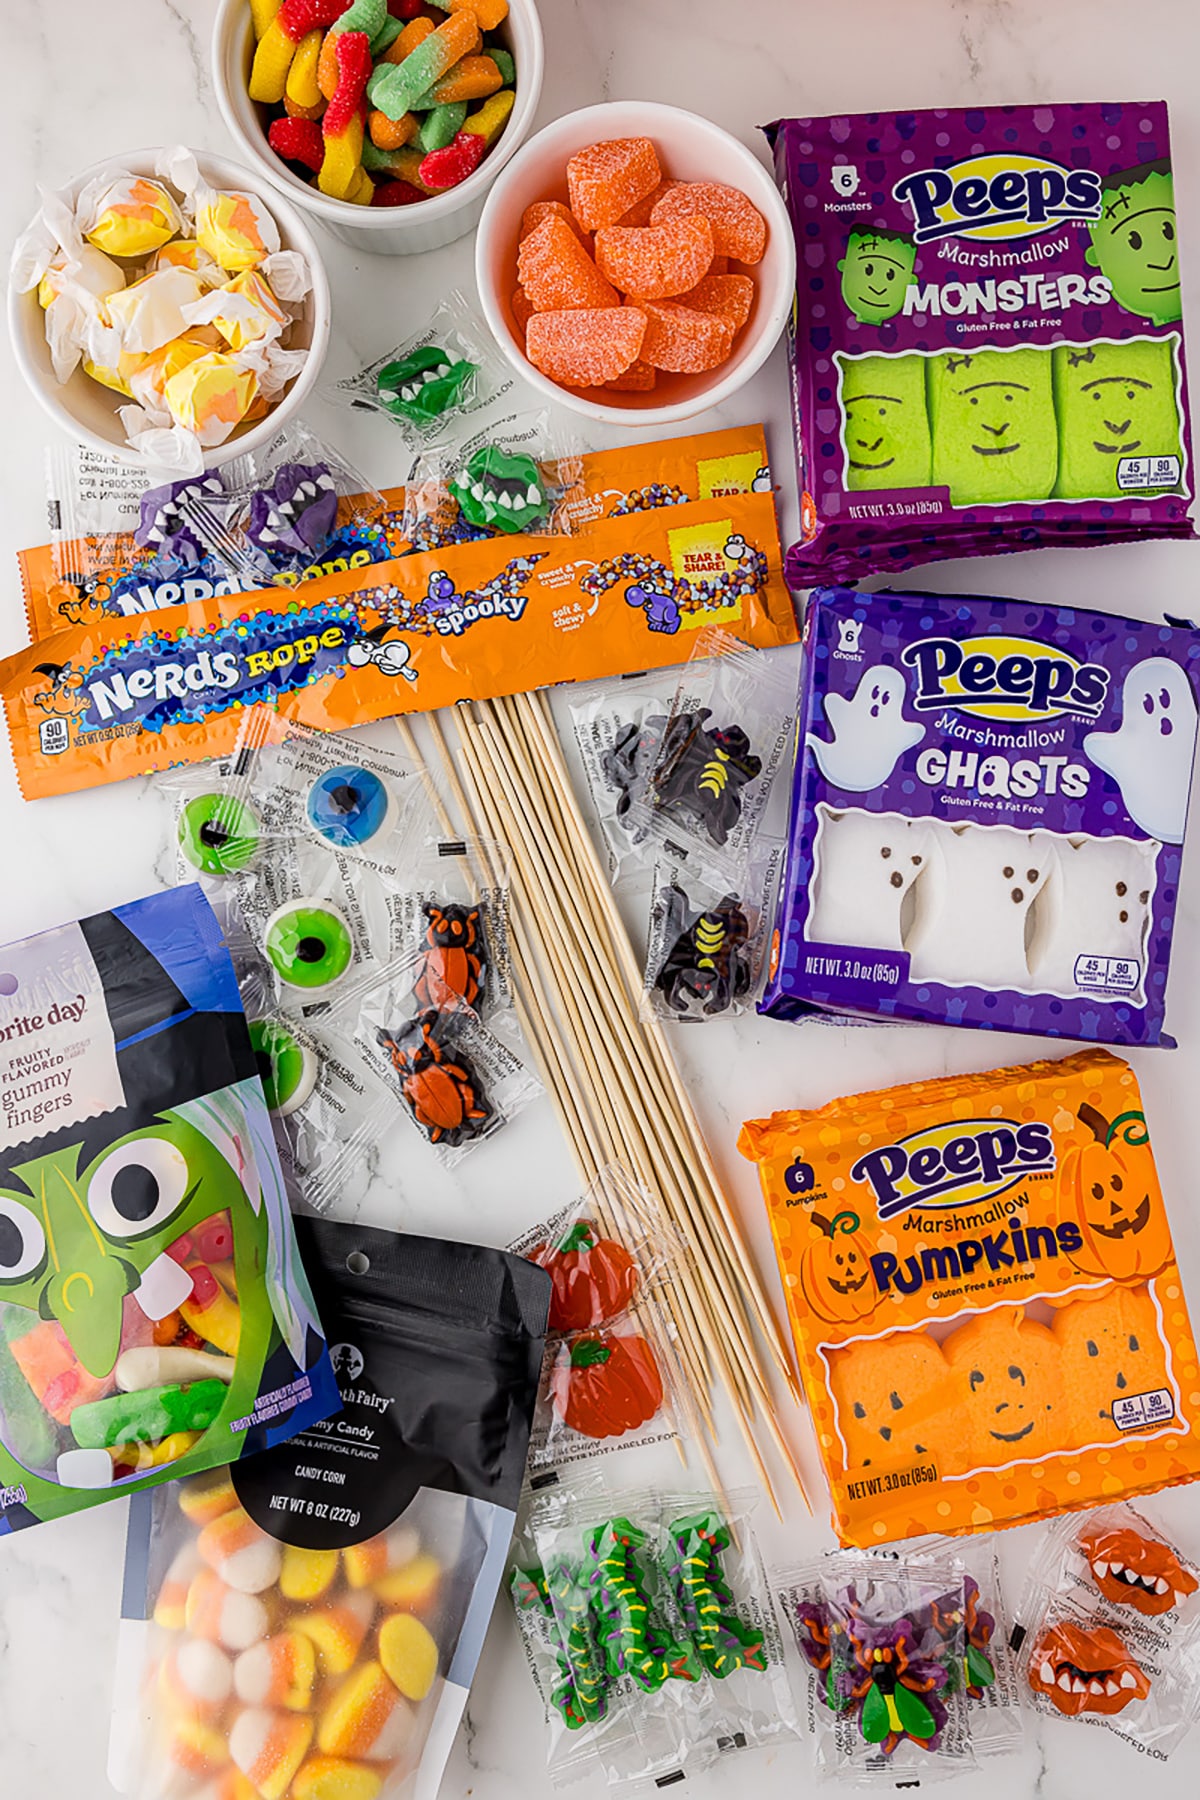 ingredients for candy kabobs including halloween peeps, wooden skewers, and gummy candies